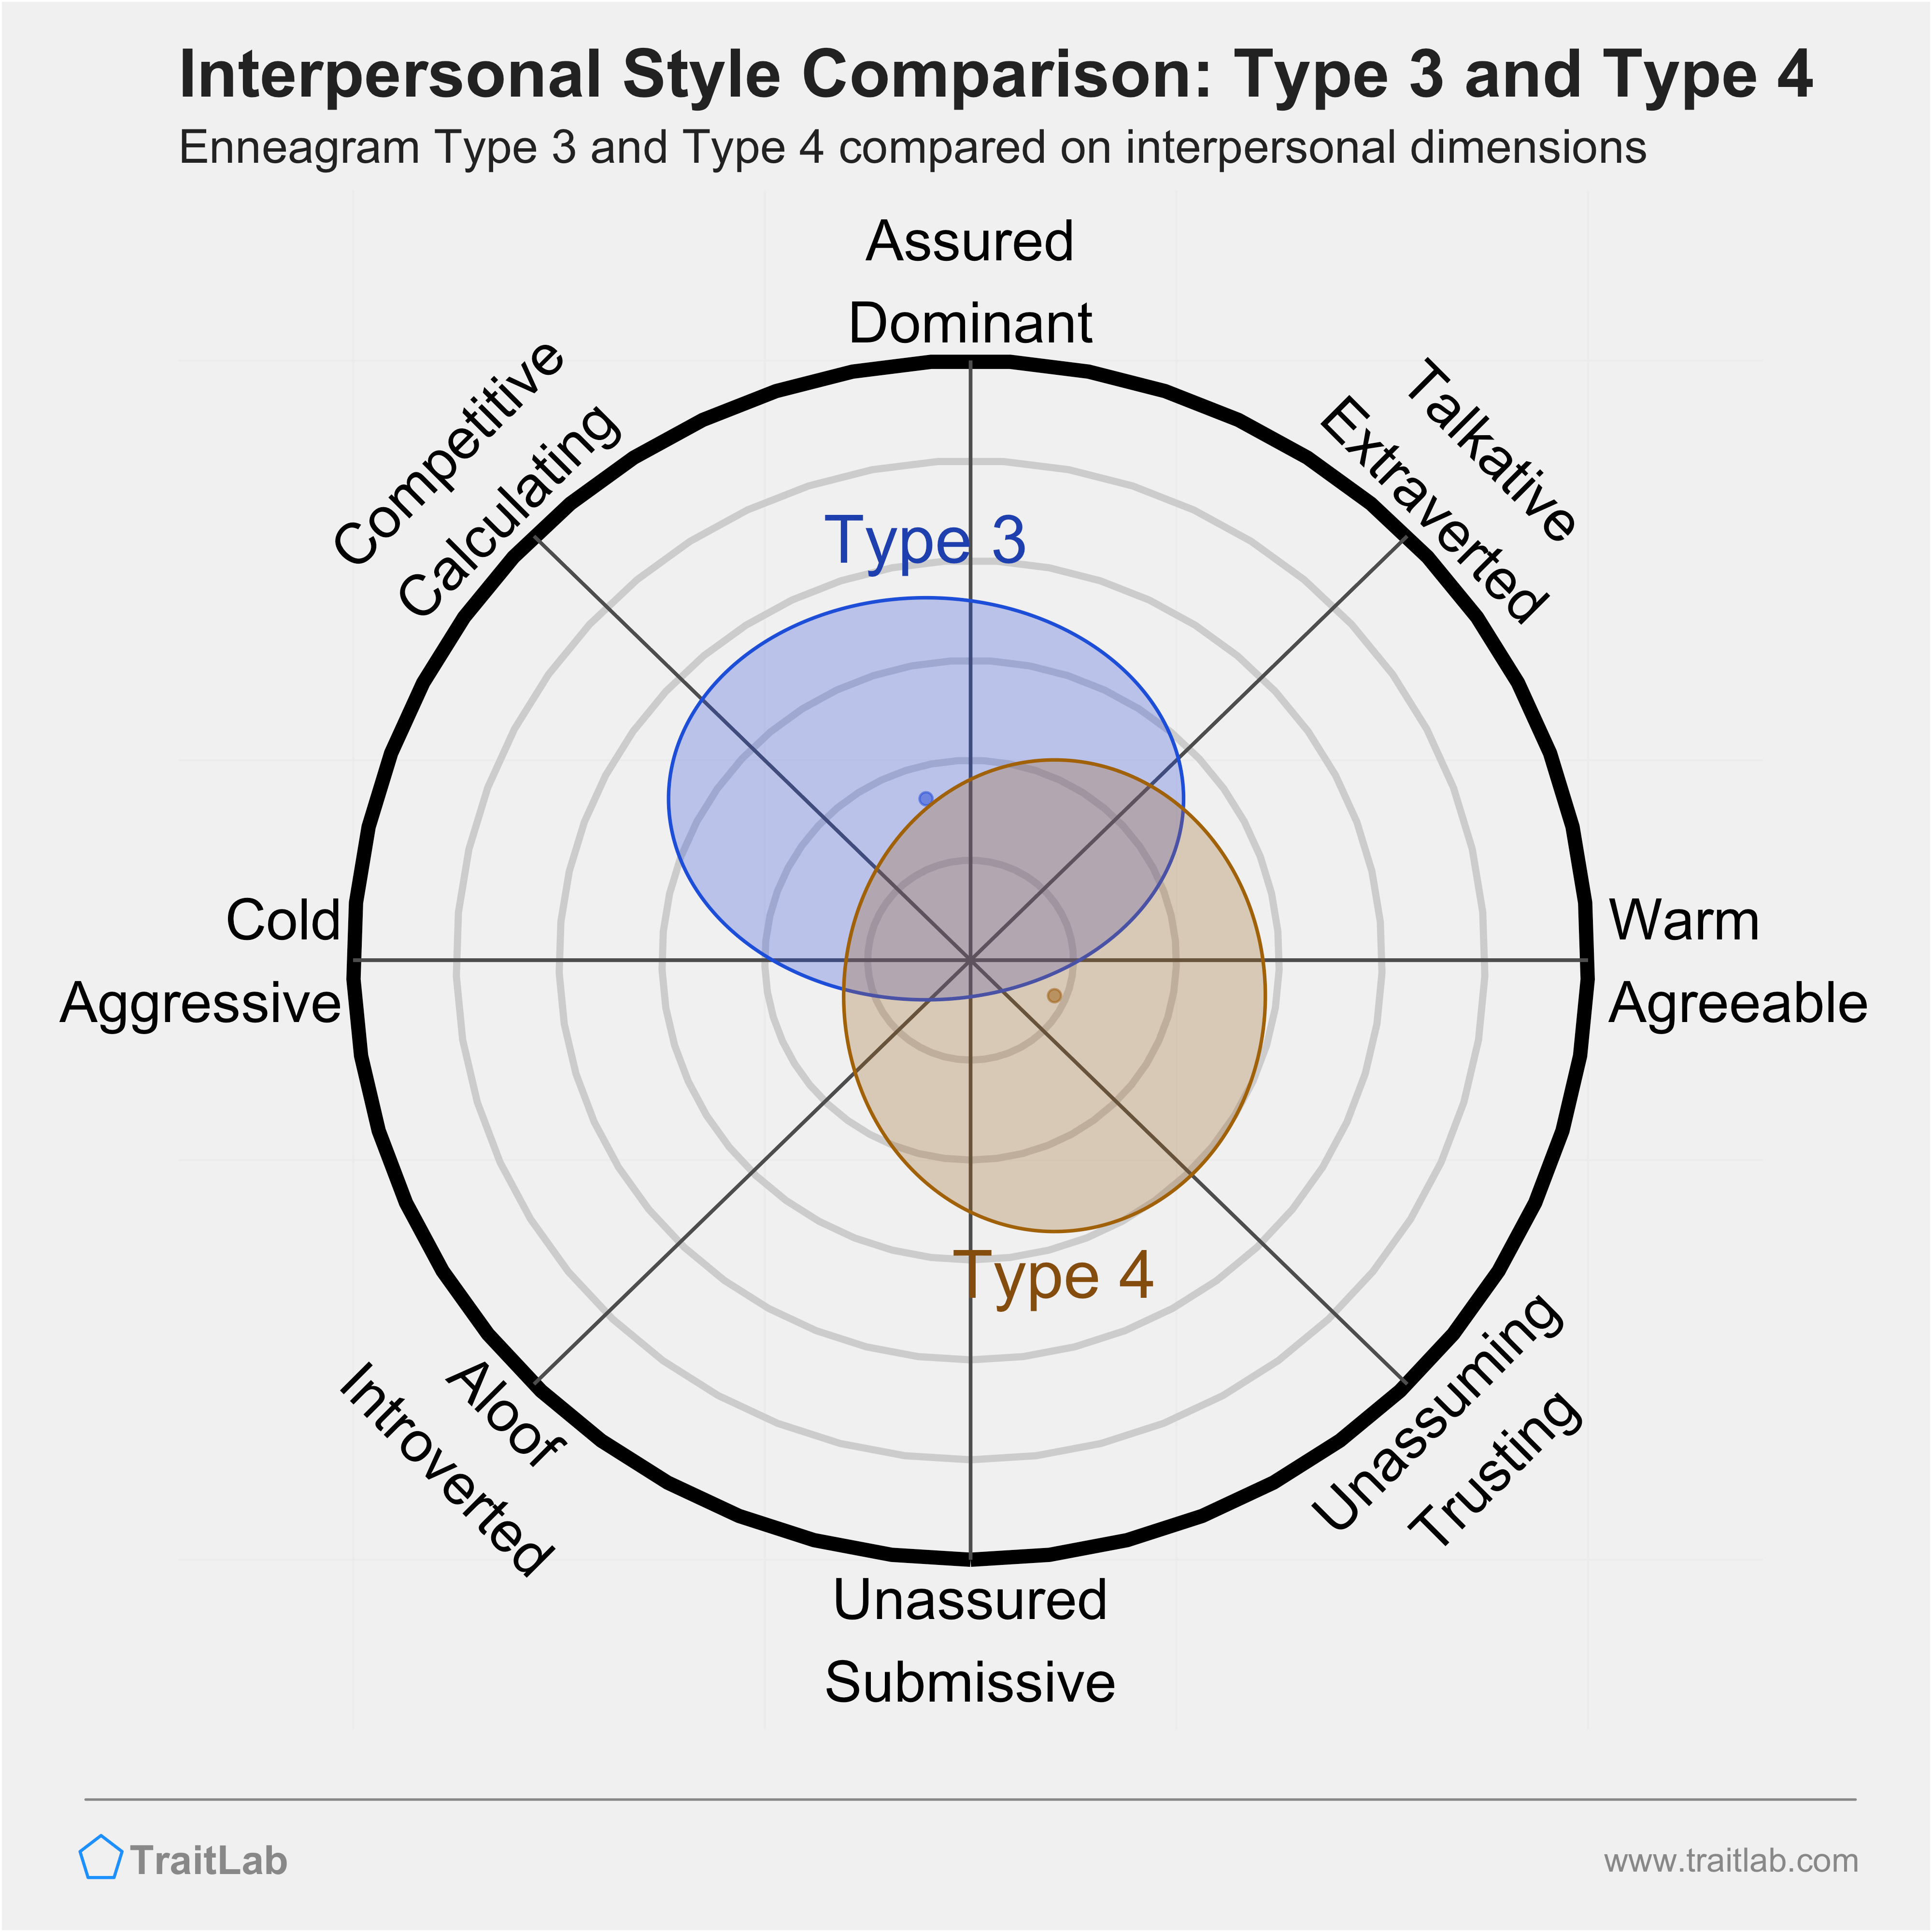 Enneagram Type 3 and Type 4 comparison across interpersonal dimensions